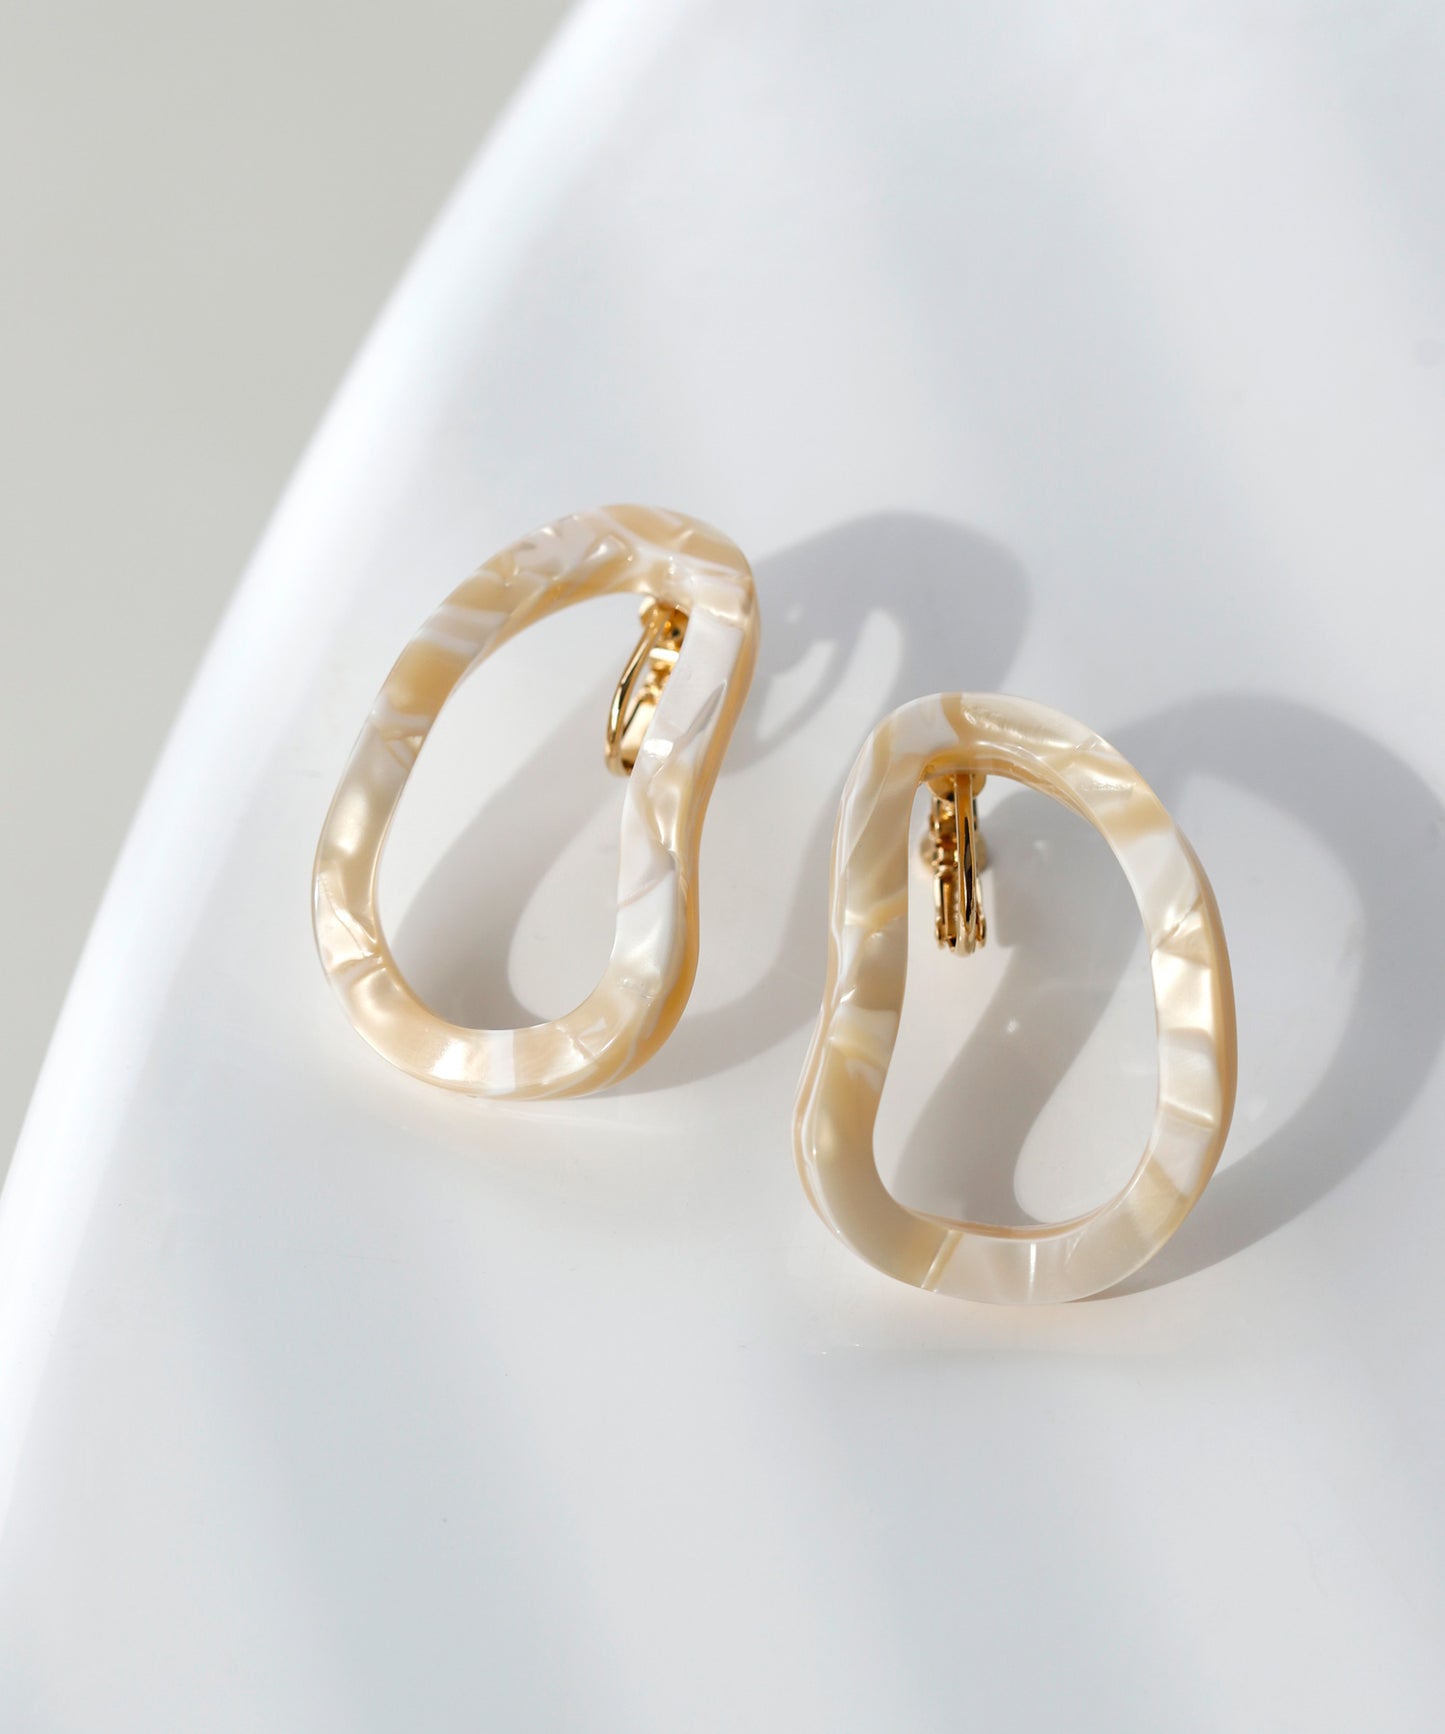 Marble Clip On Earrings[Ownideal]